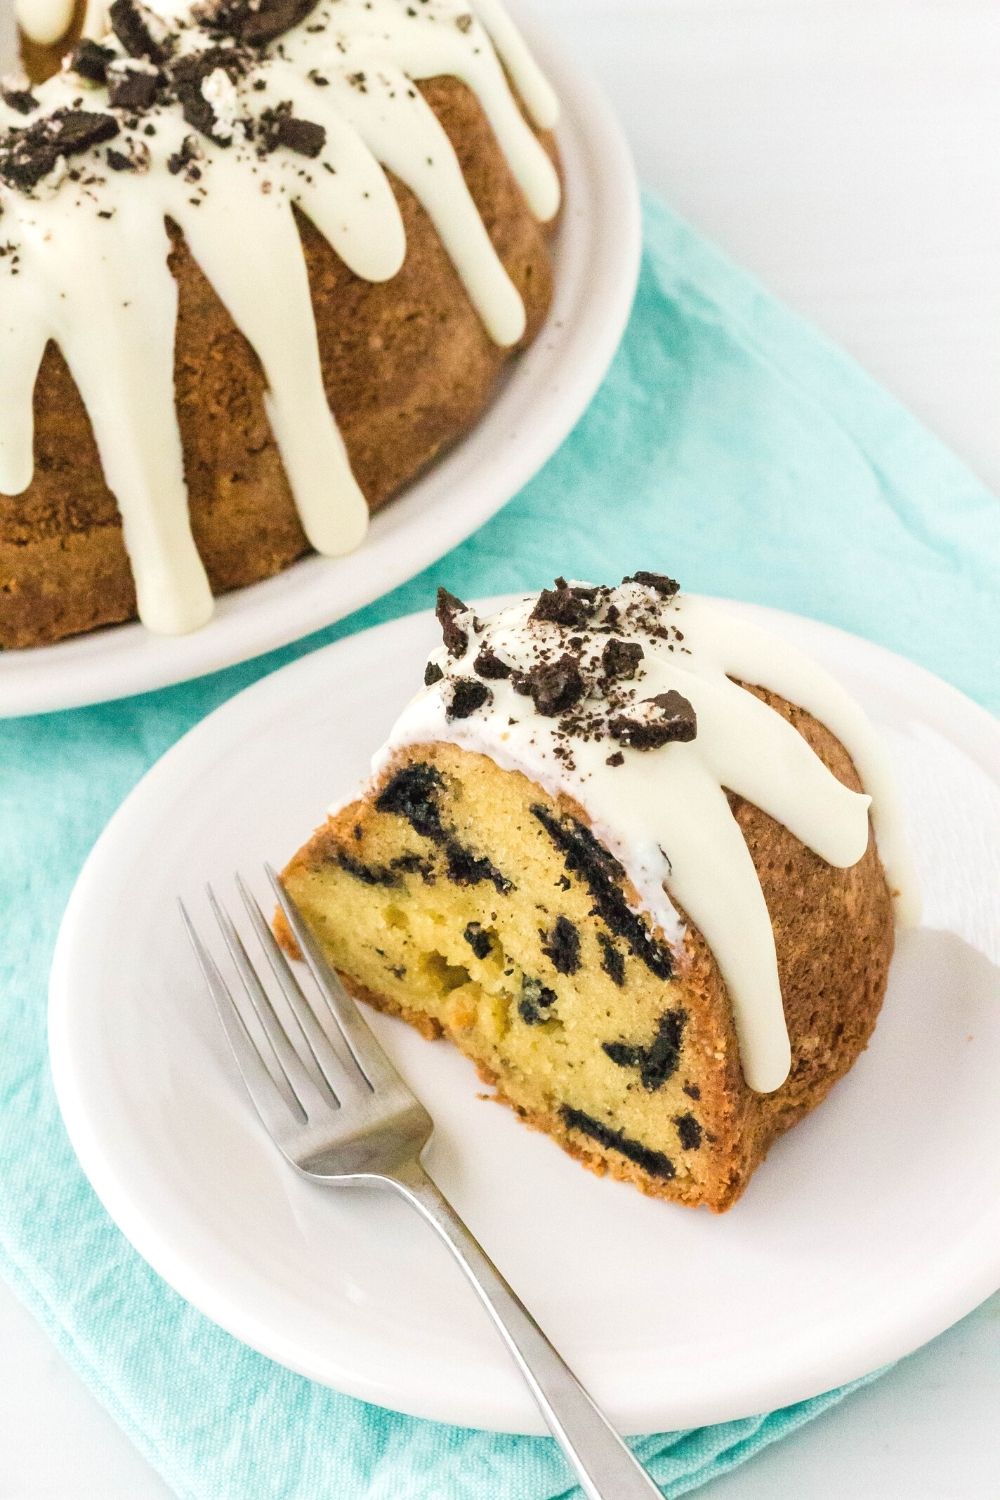 a slice of pound cake with oreos served on a white plate, with a fork alongside it and the rest of the cake in the background